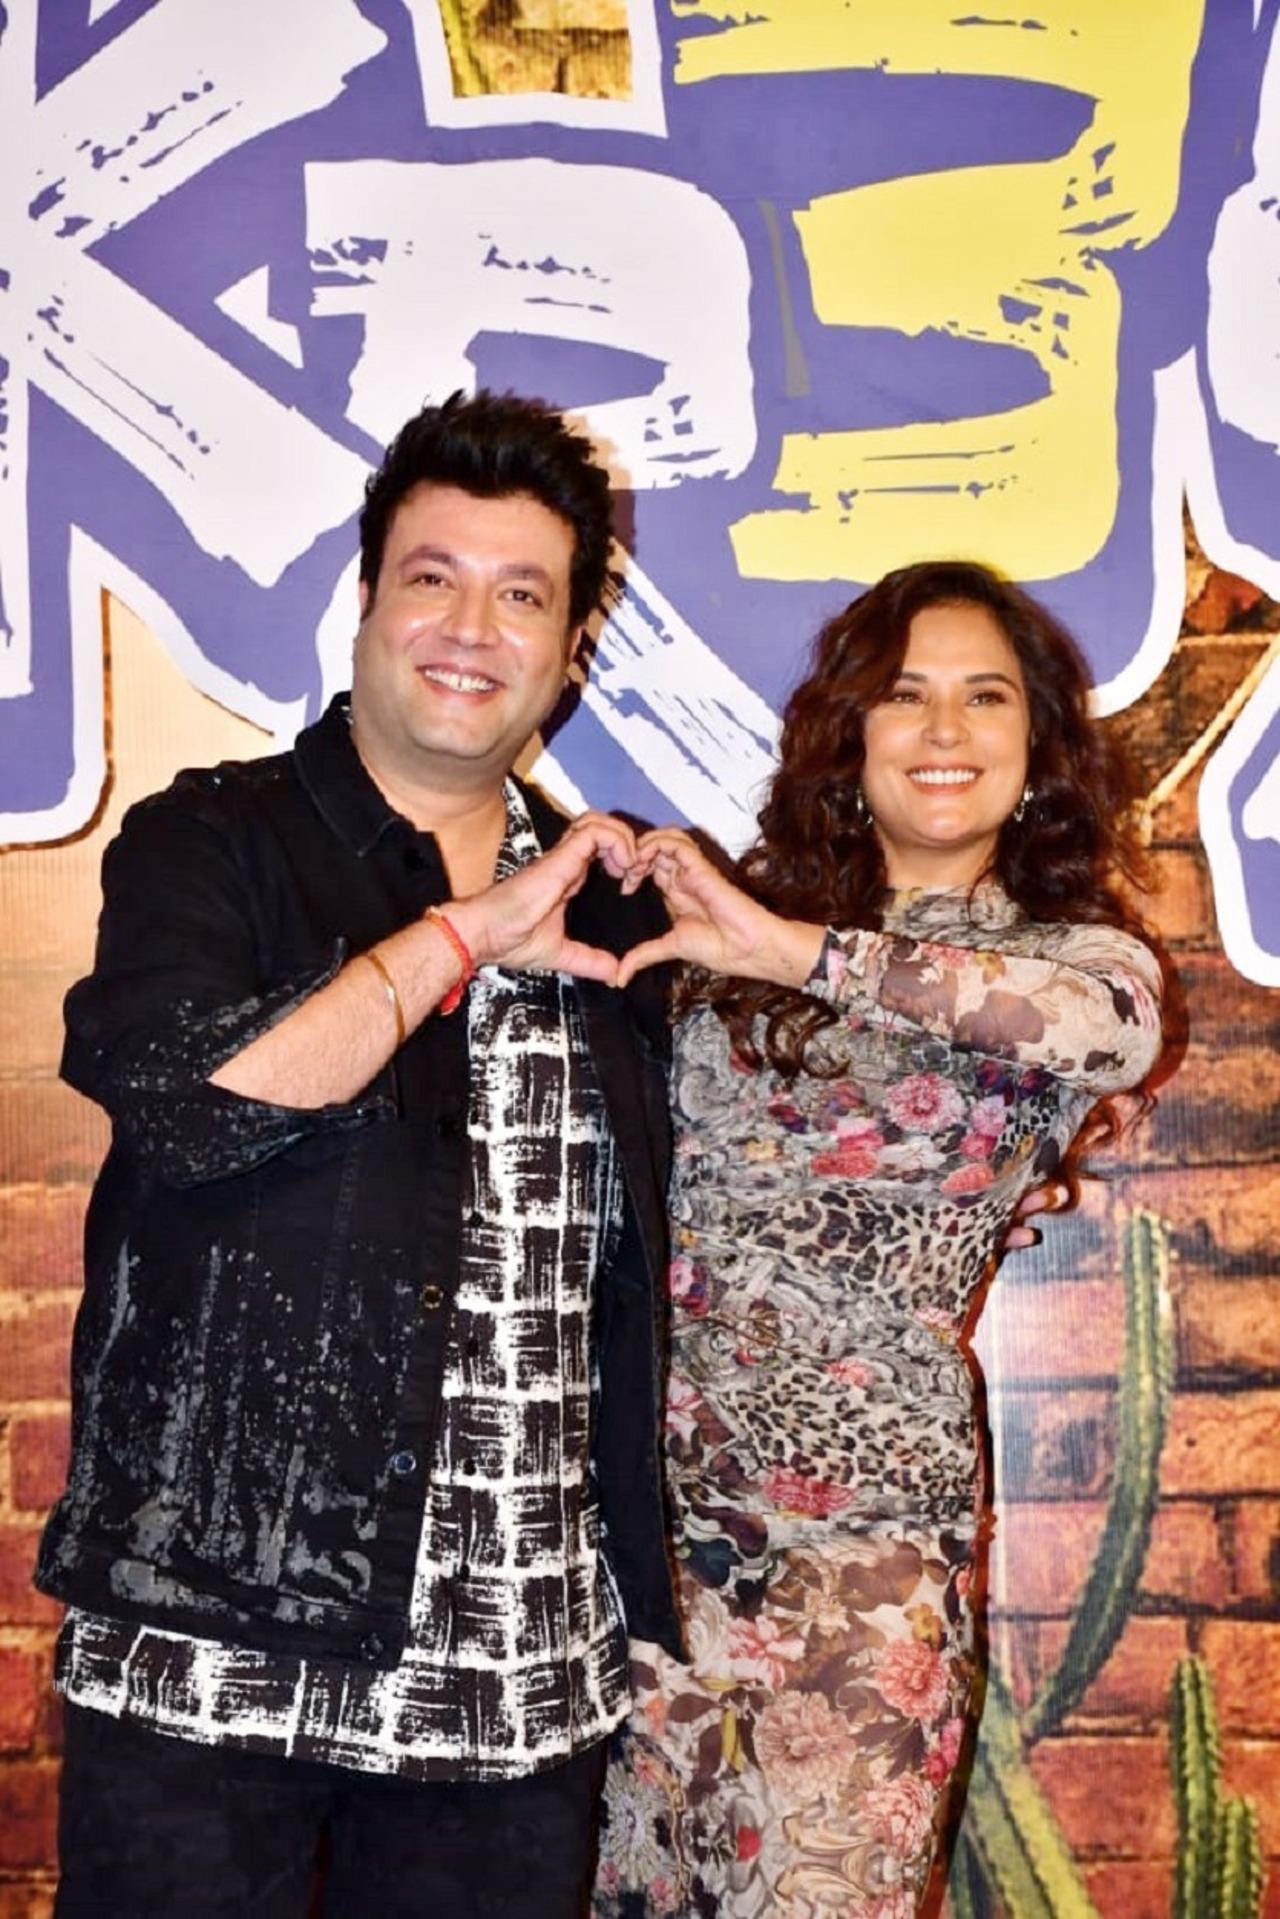 During the photo-op session, Richa and Varun made a cute heart as they posed for the paparazzi